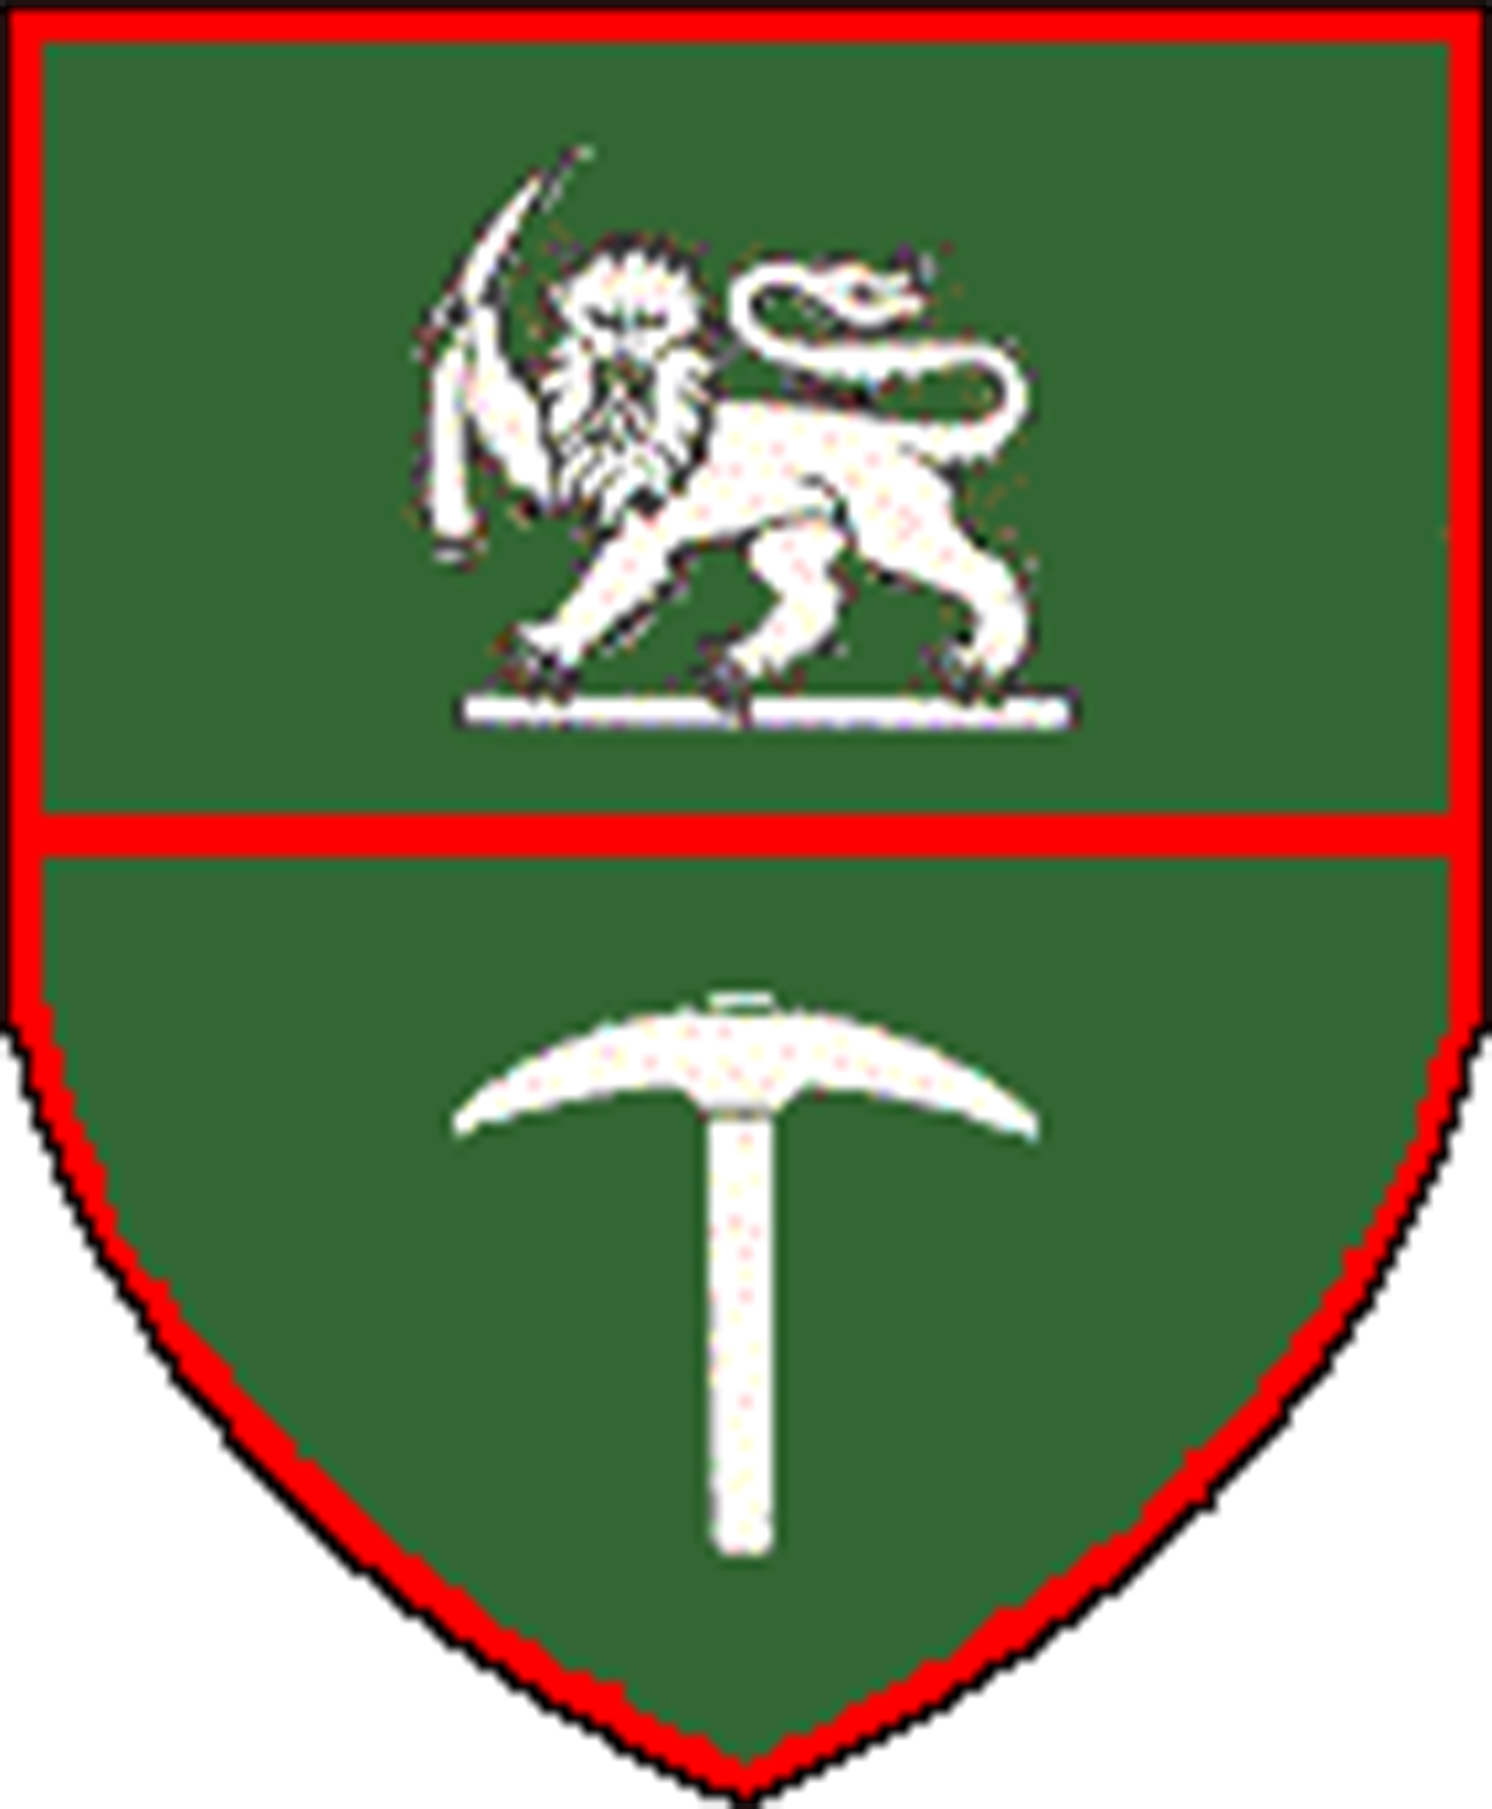 Rhodesian army crest which is the right side logo of the Rhodesia Army Association logo